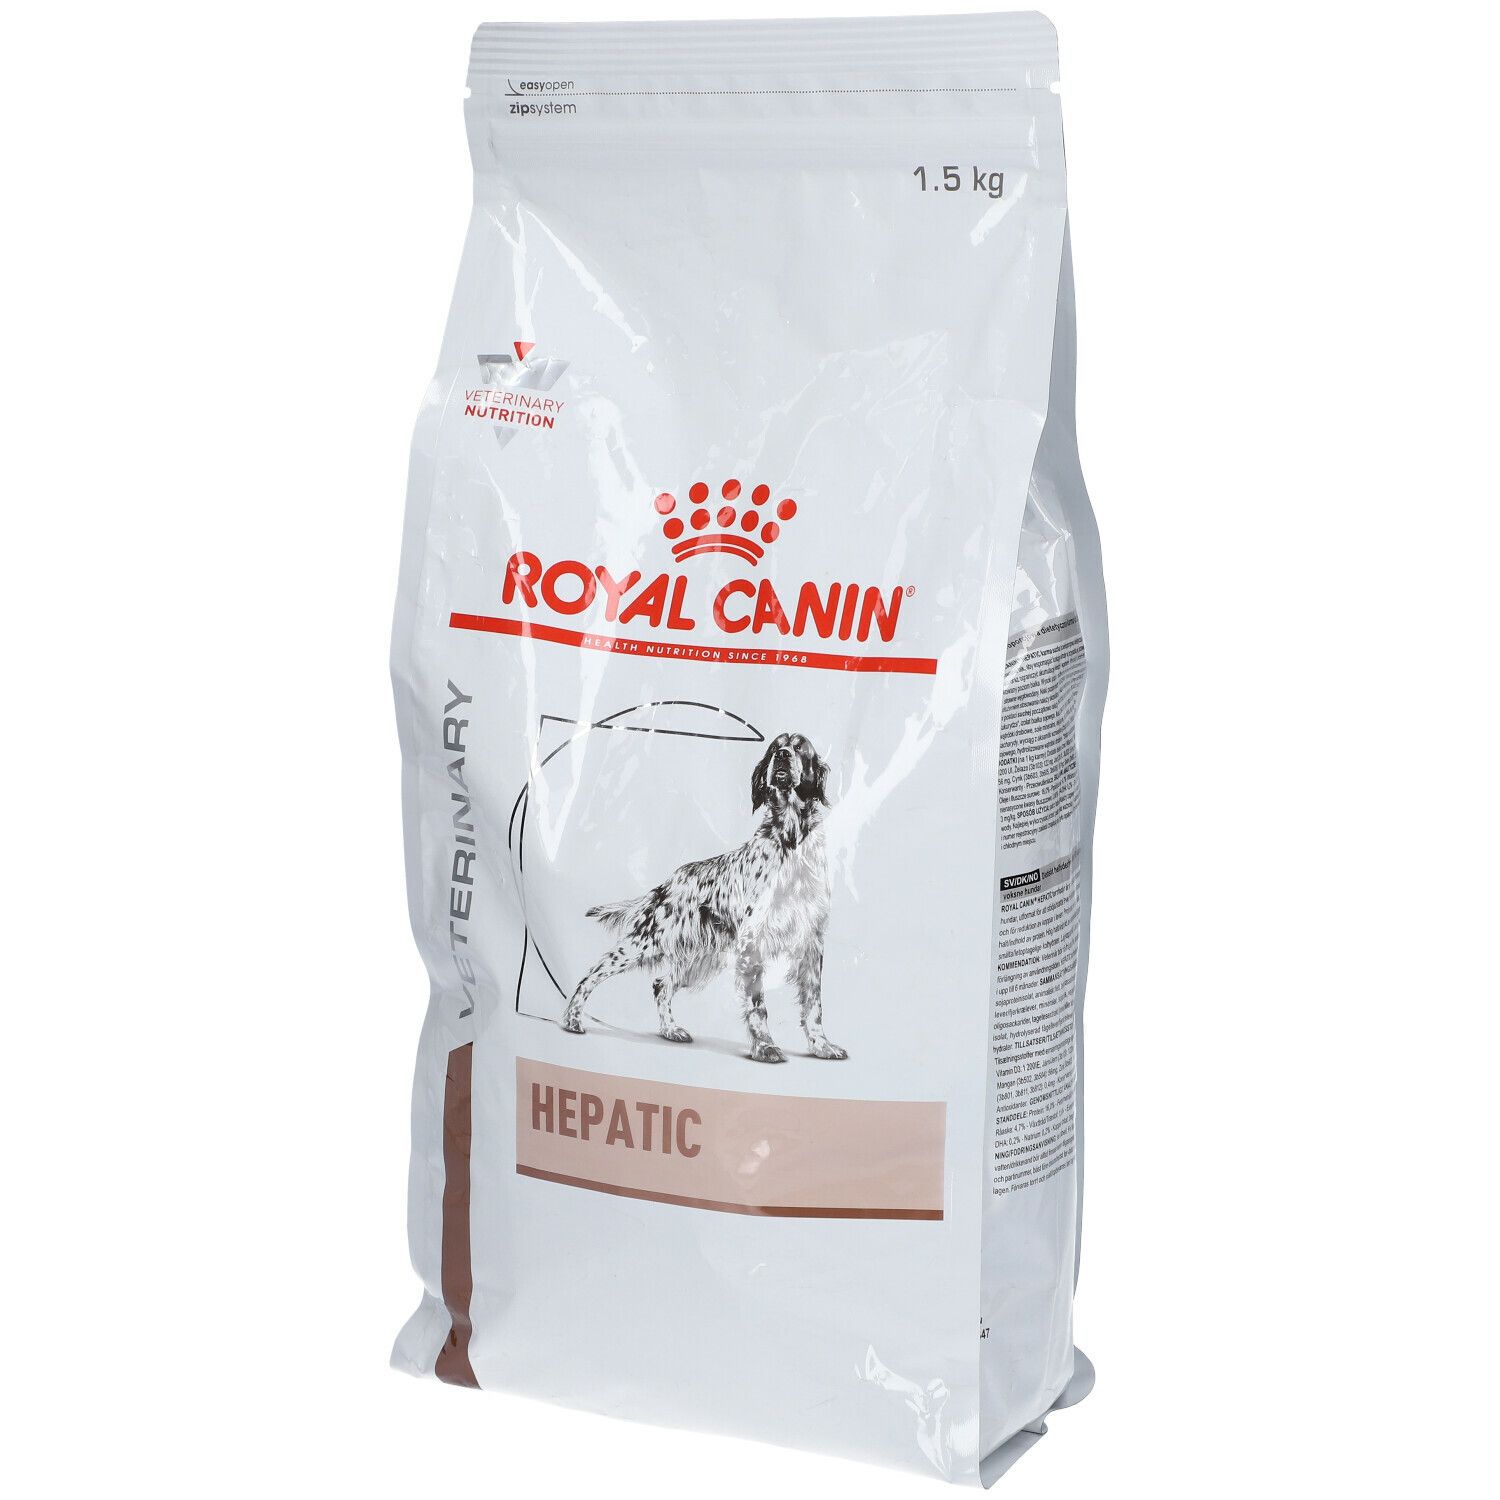 Royal Canin® Canine Hepatic chien adulte